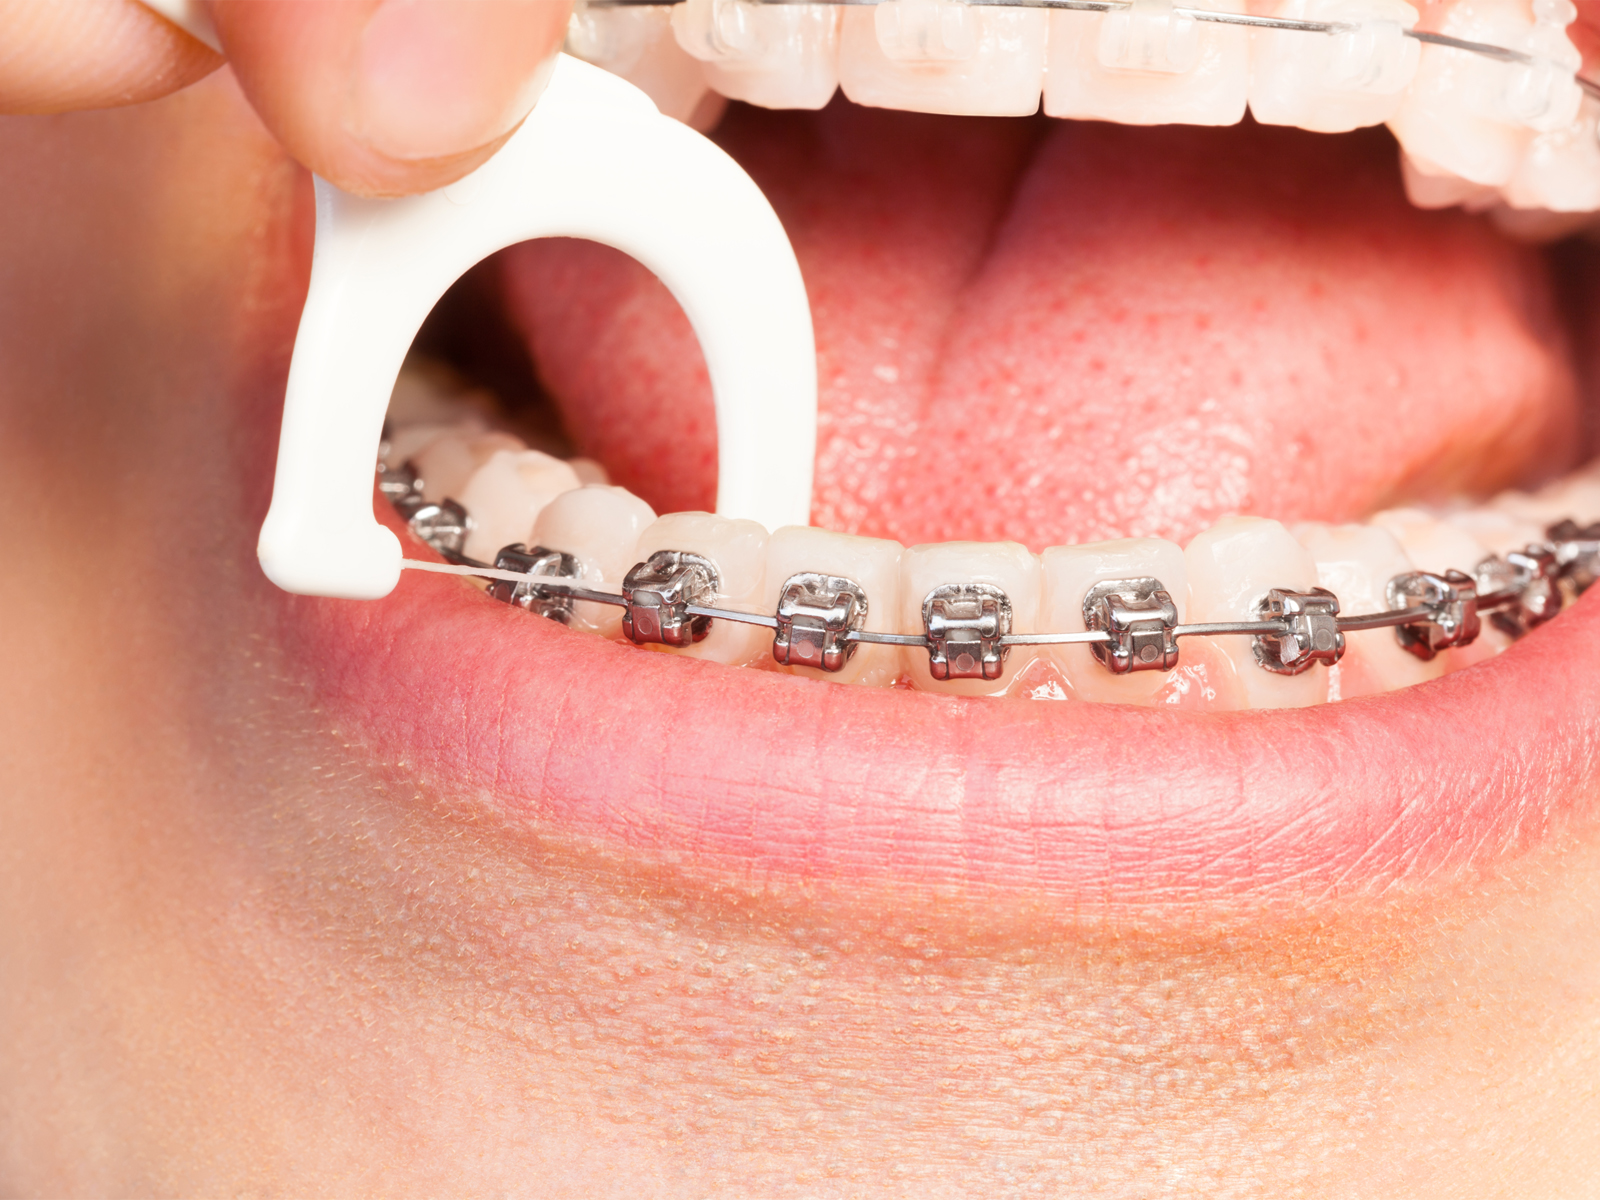 How often should braces be cleaned?